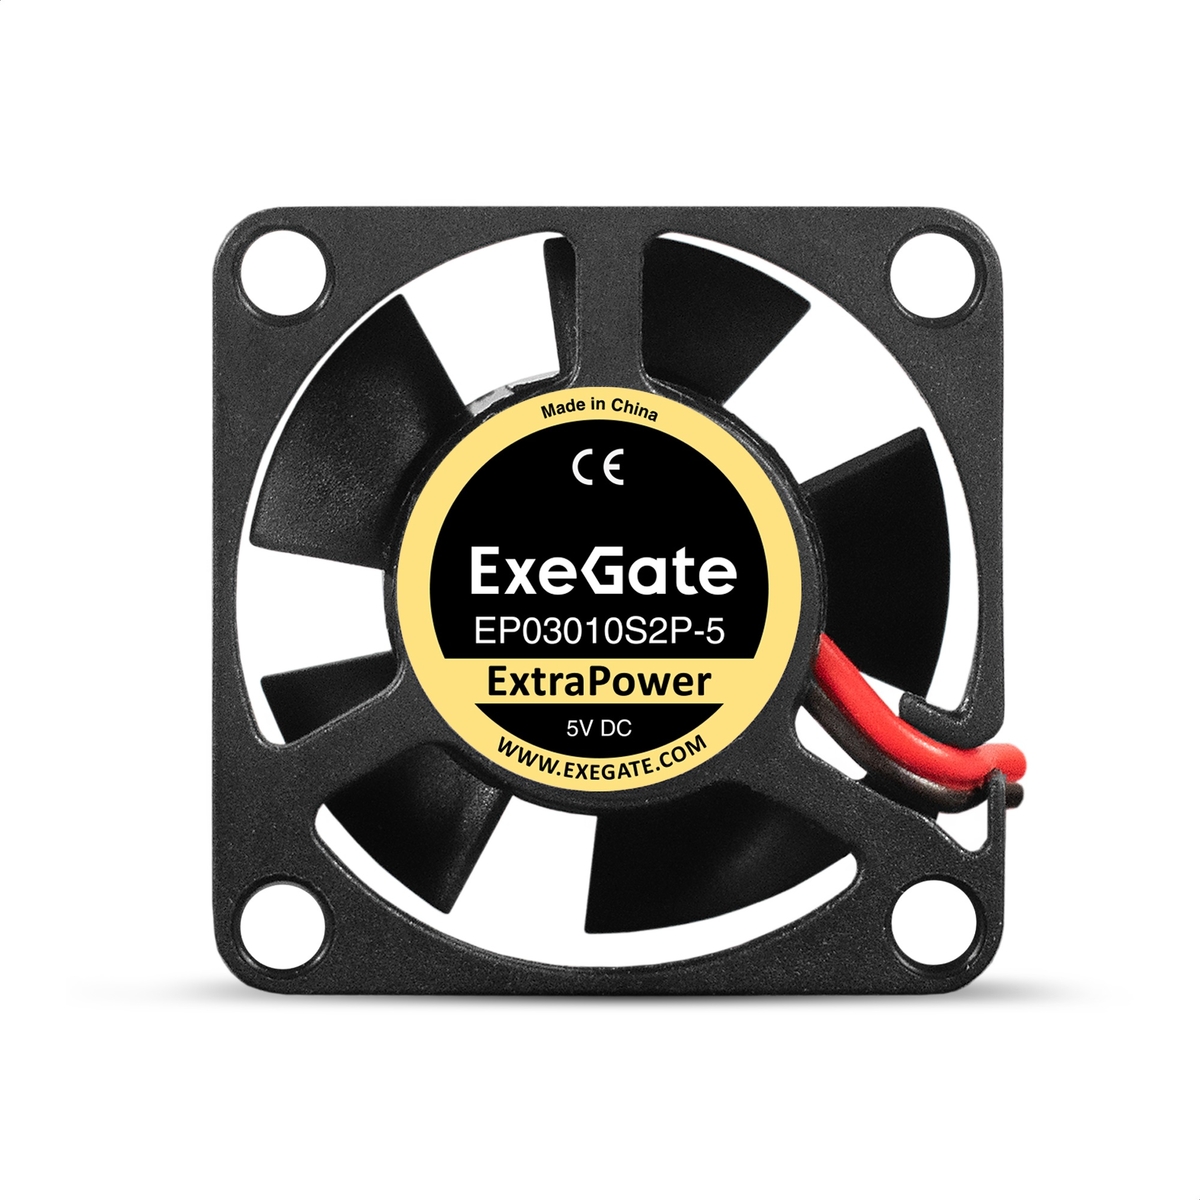  5 DC ExeGate ExtraPower EP03010S2P-5